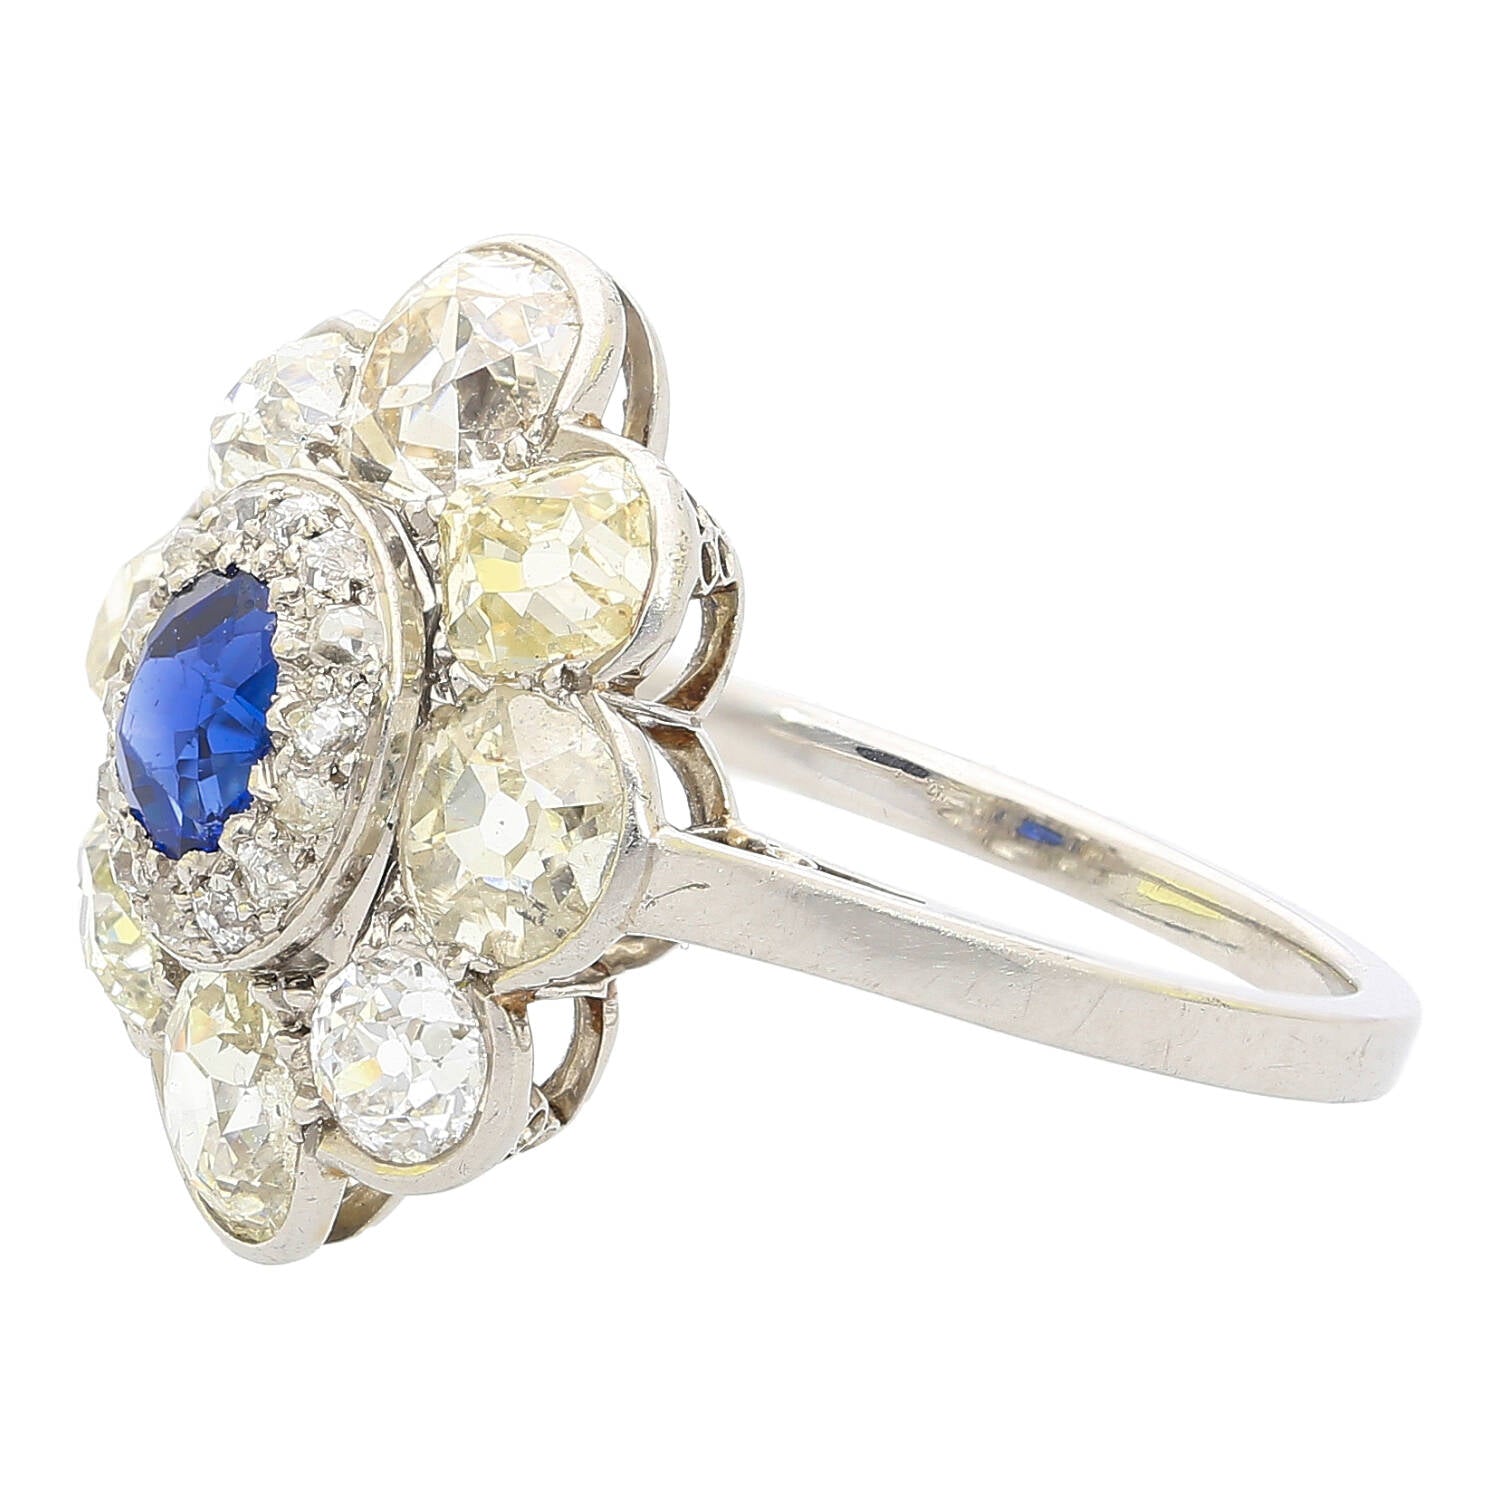 Vintage AGL Certified No Heat Burma Blue Sapphire and Old Euro Cut Diamond Ring in Platinum